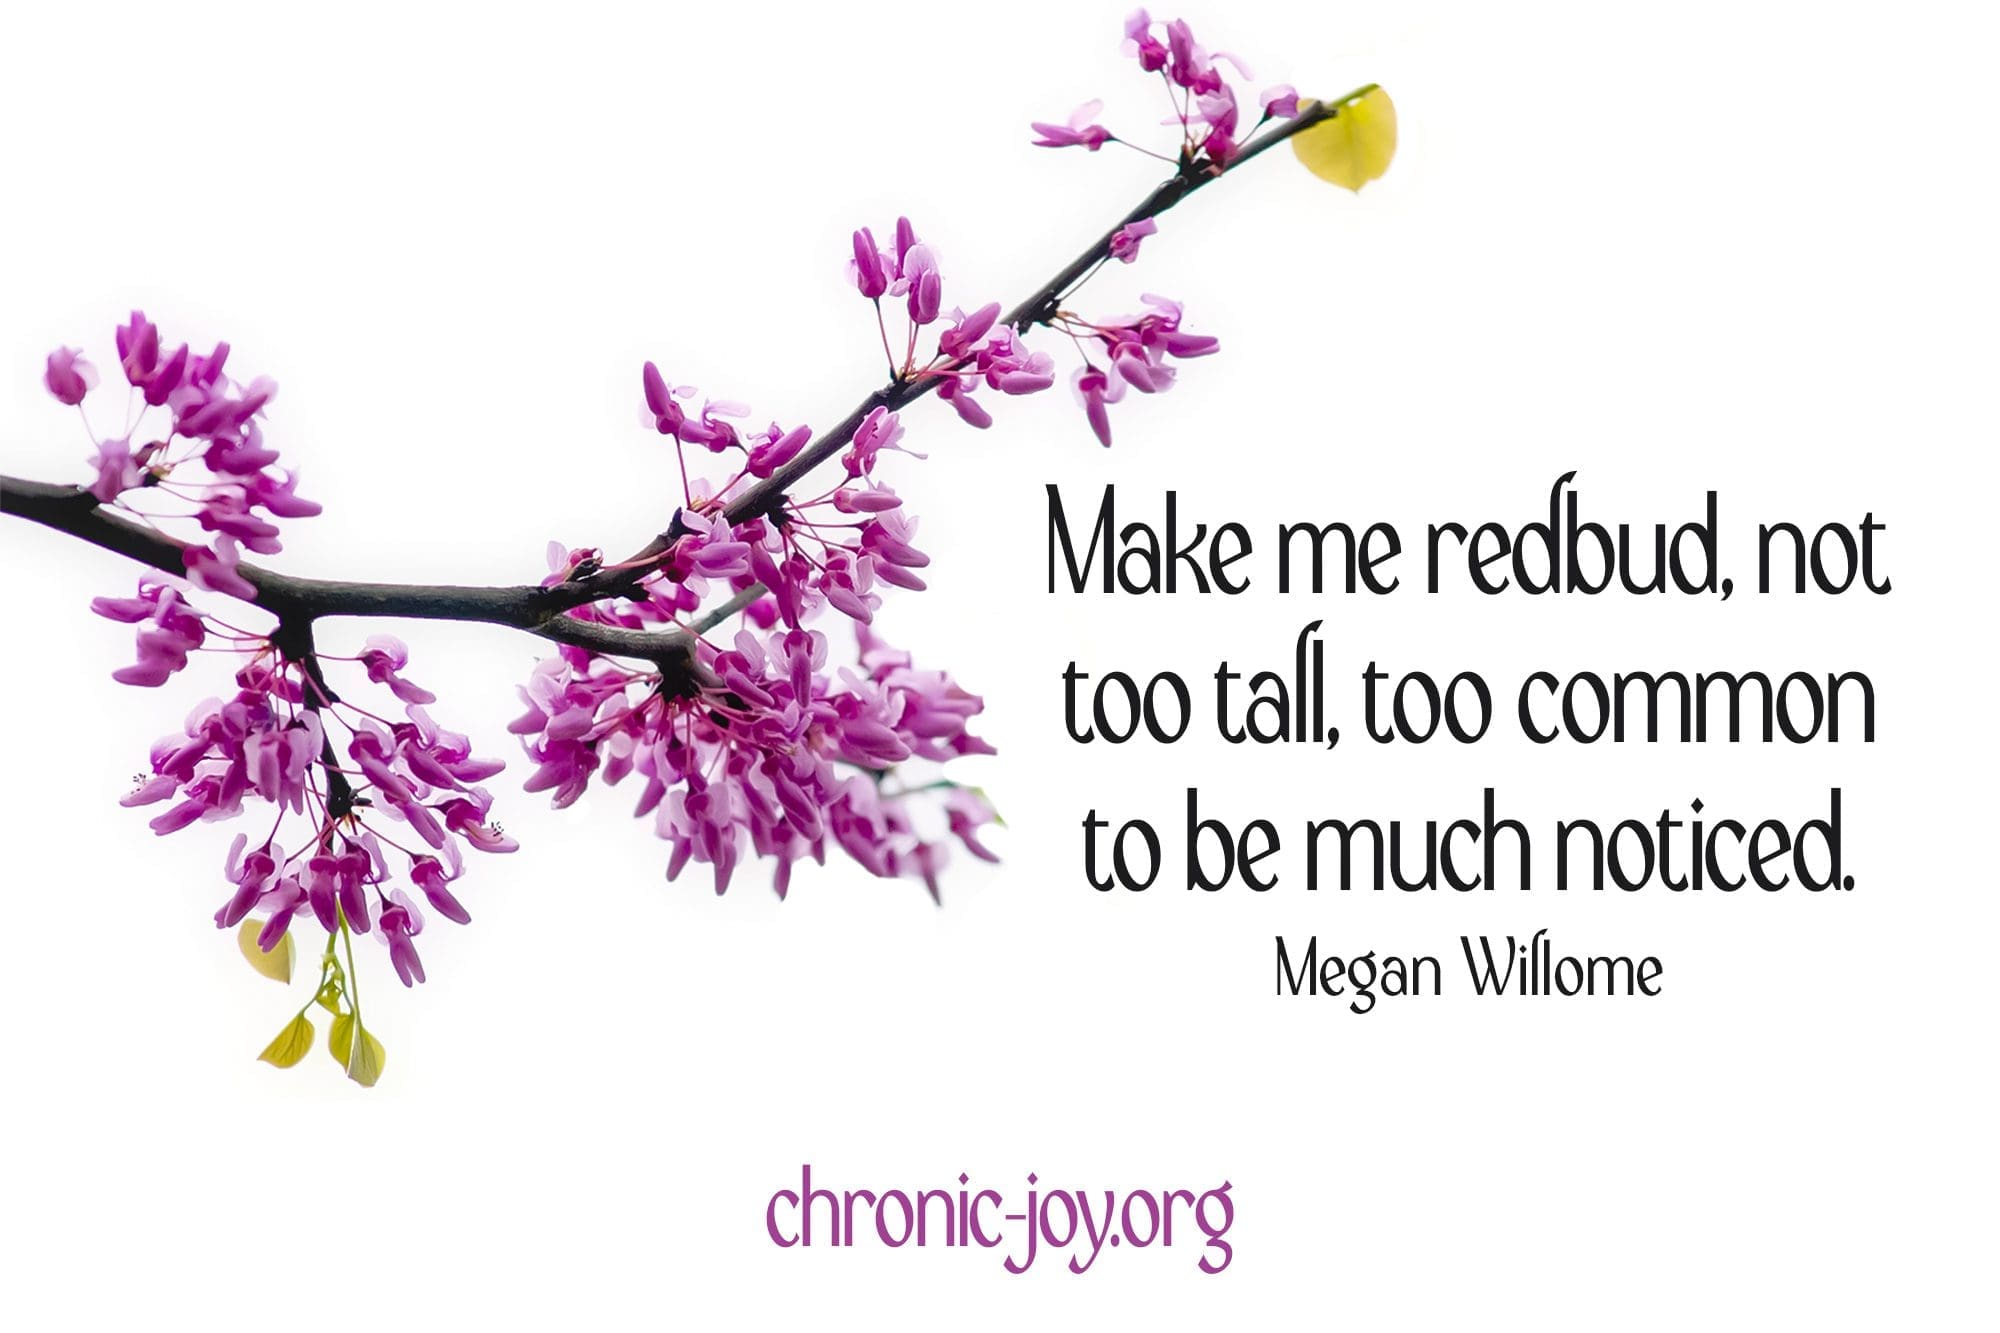 "Make me redbud, not too tall, too common to be much noticed." Megan Willome